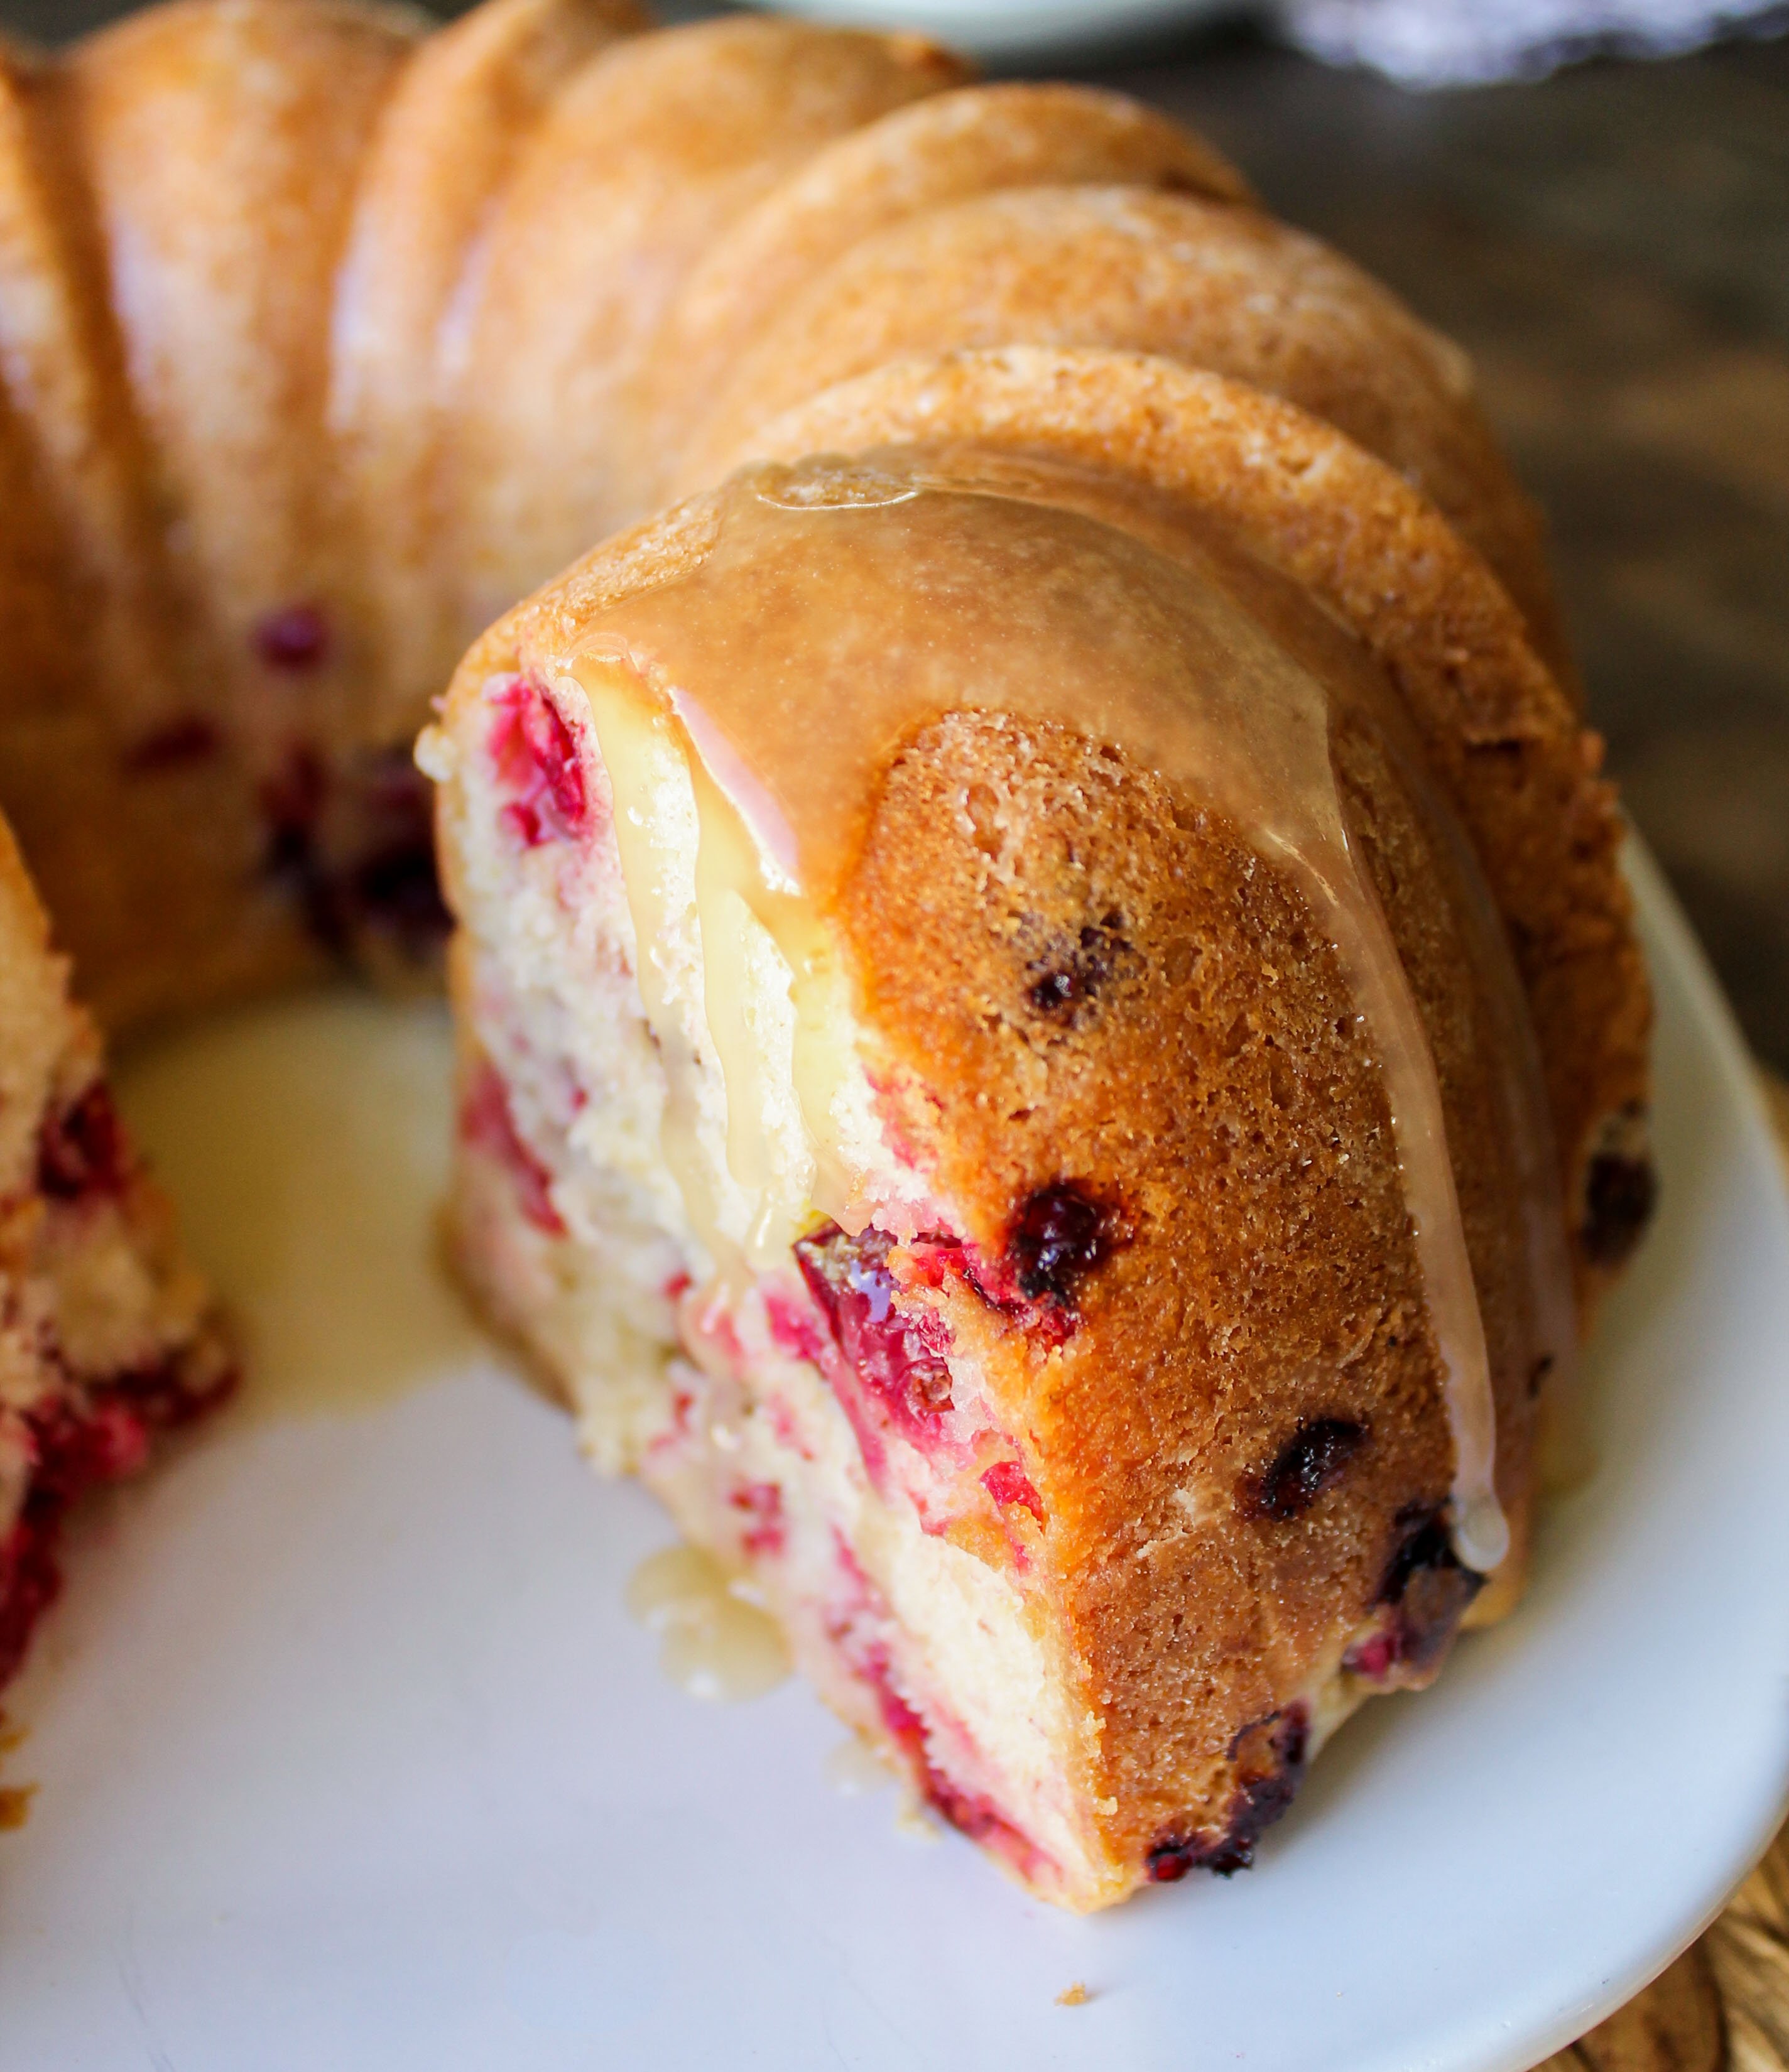 Cranberry Cake with Warm Vanilla Butter Sauce - The Food Charlatan